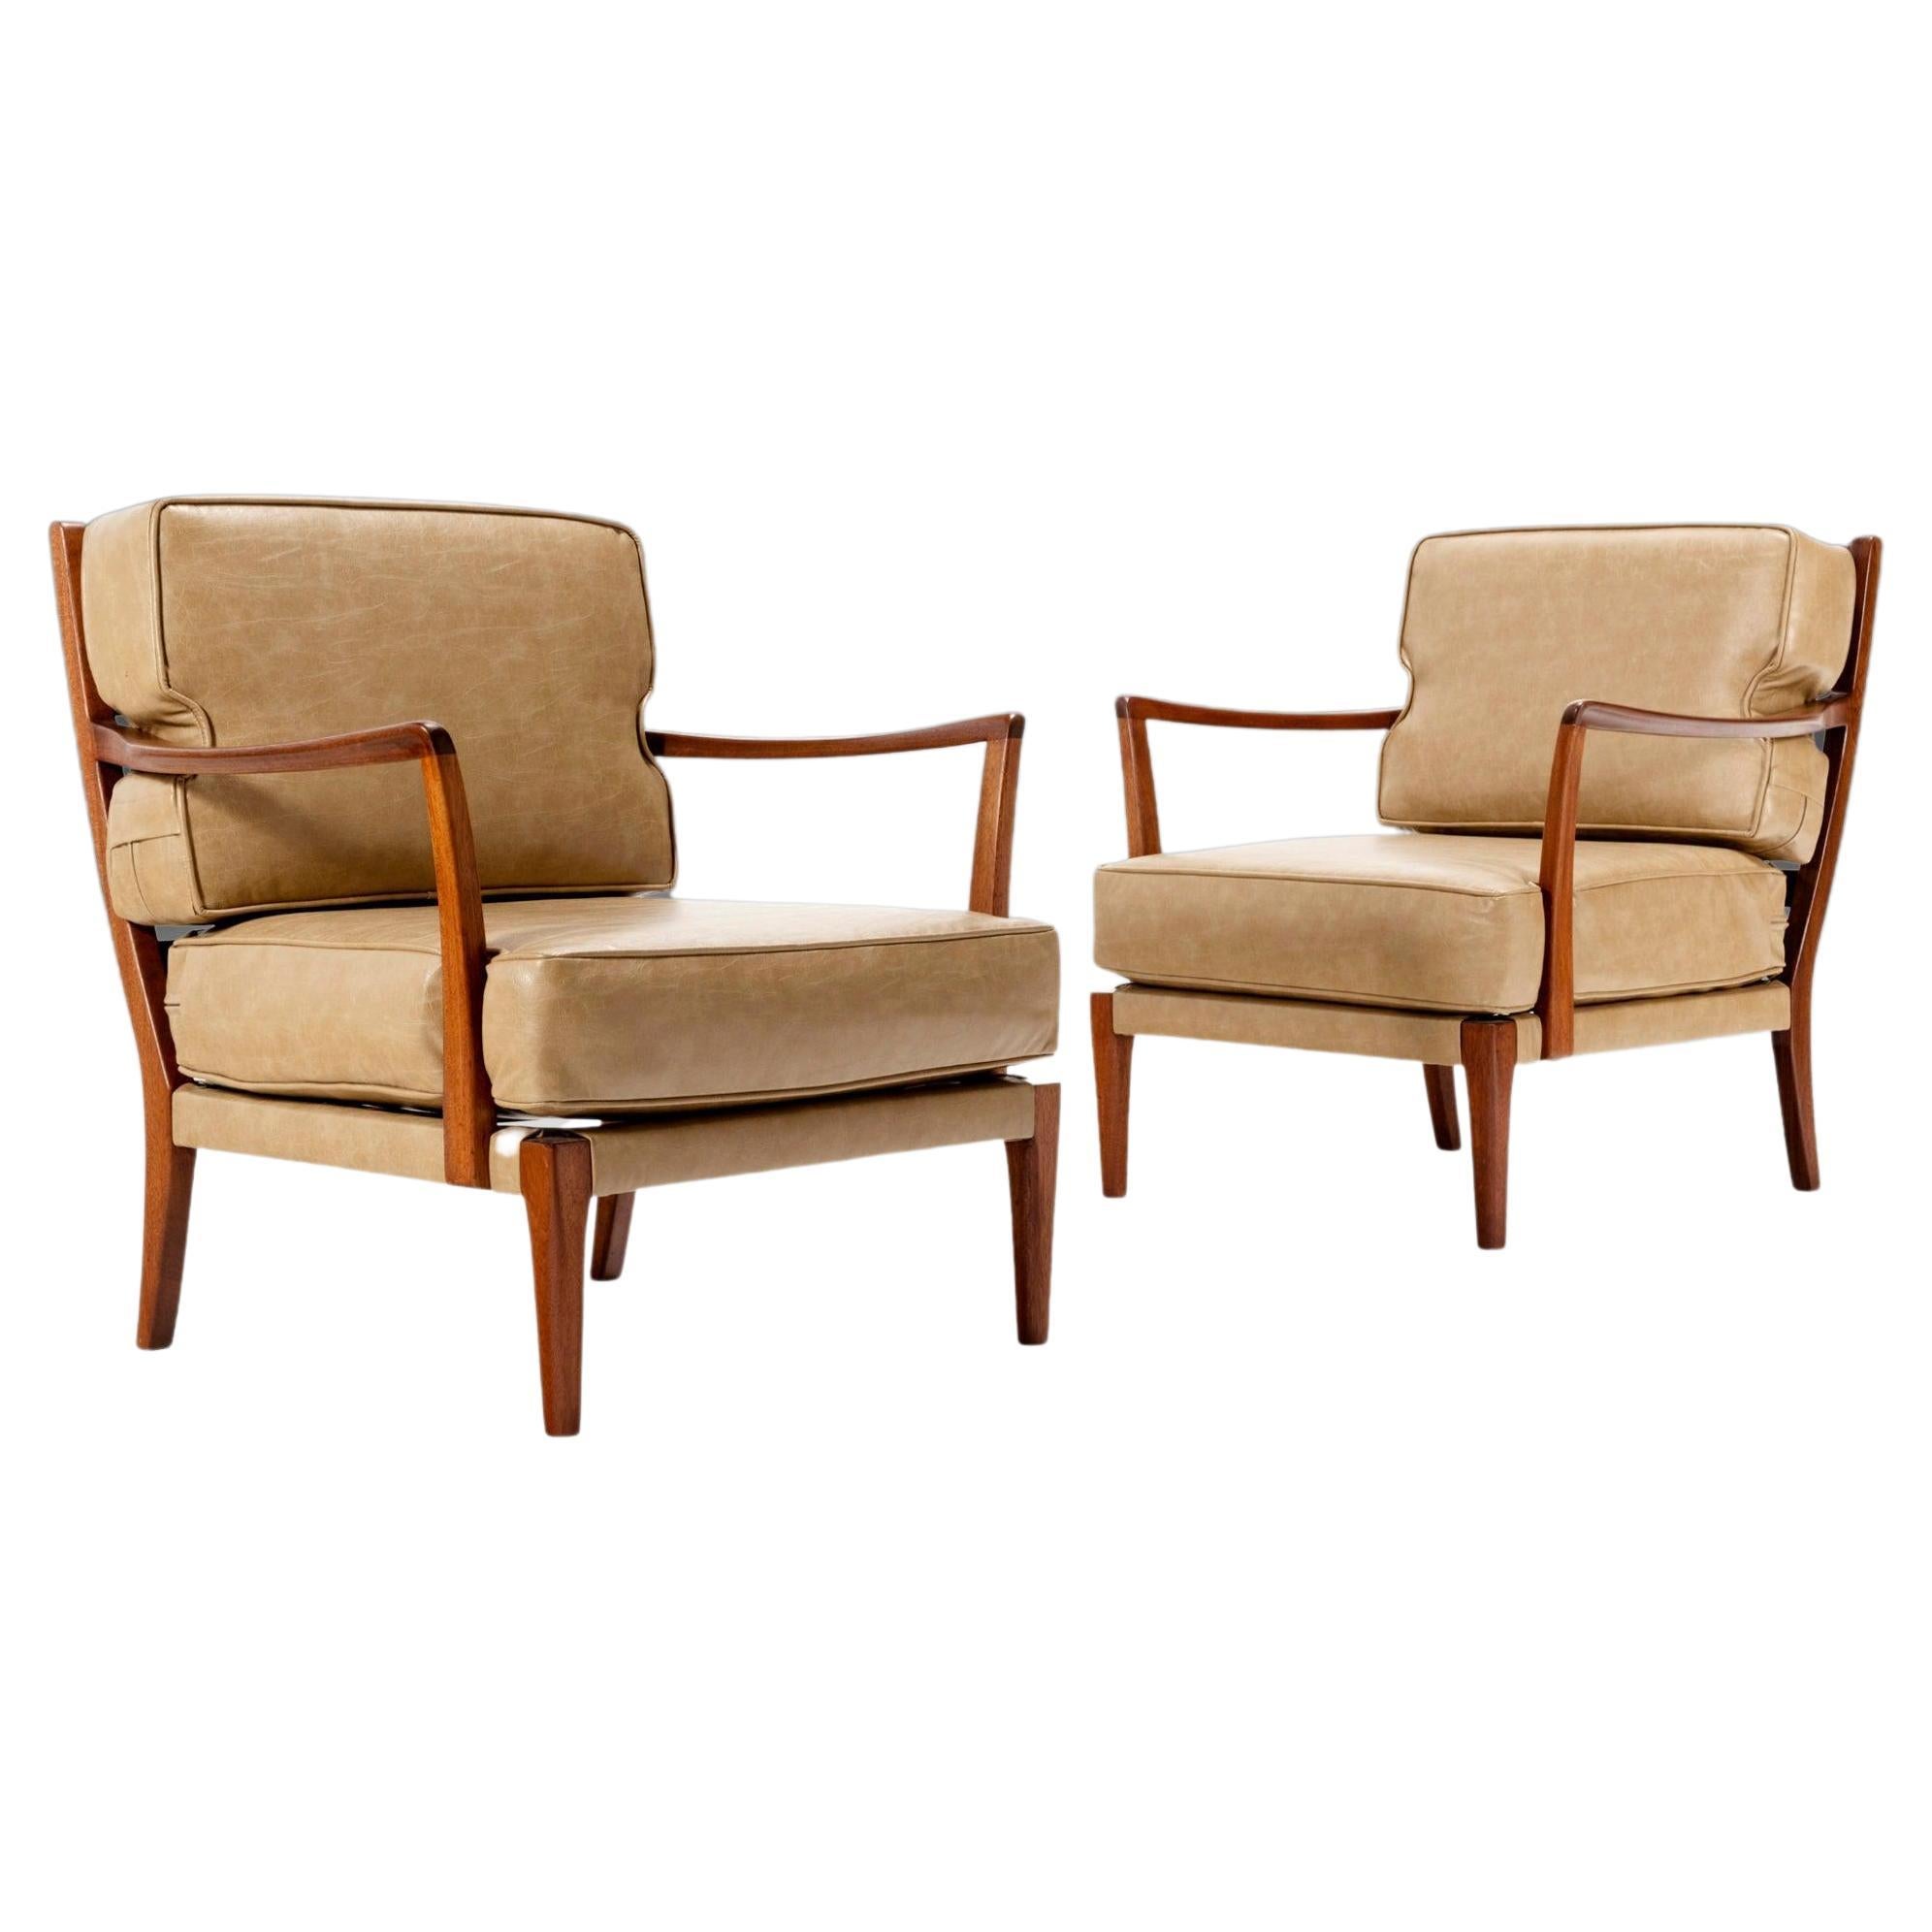 Set of Two (2) Löven Style Lounge Chairs After Arne Norrell, Sweden, c. 1960s For Sale